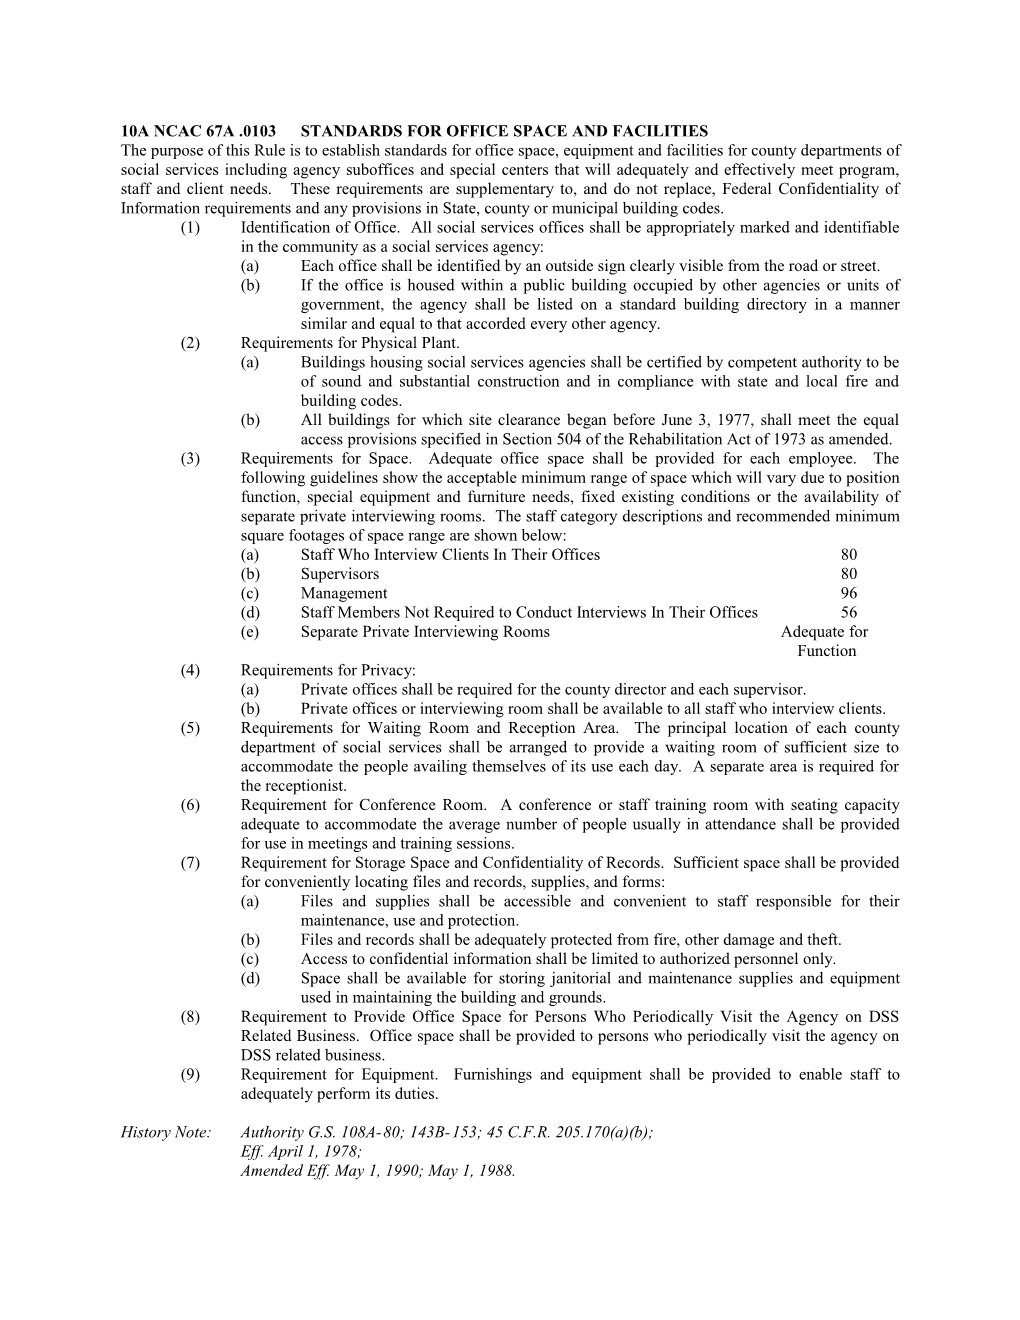 10A Ncac 67A .0103Standards for Office Space and Facilities